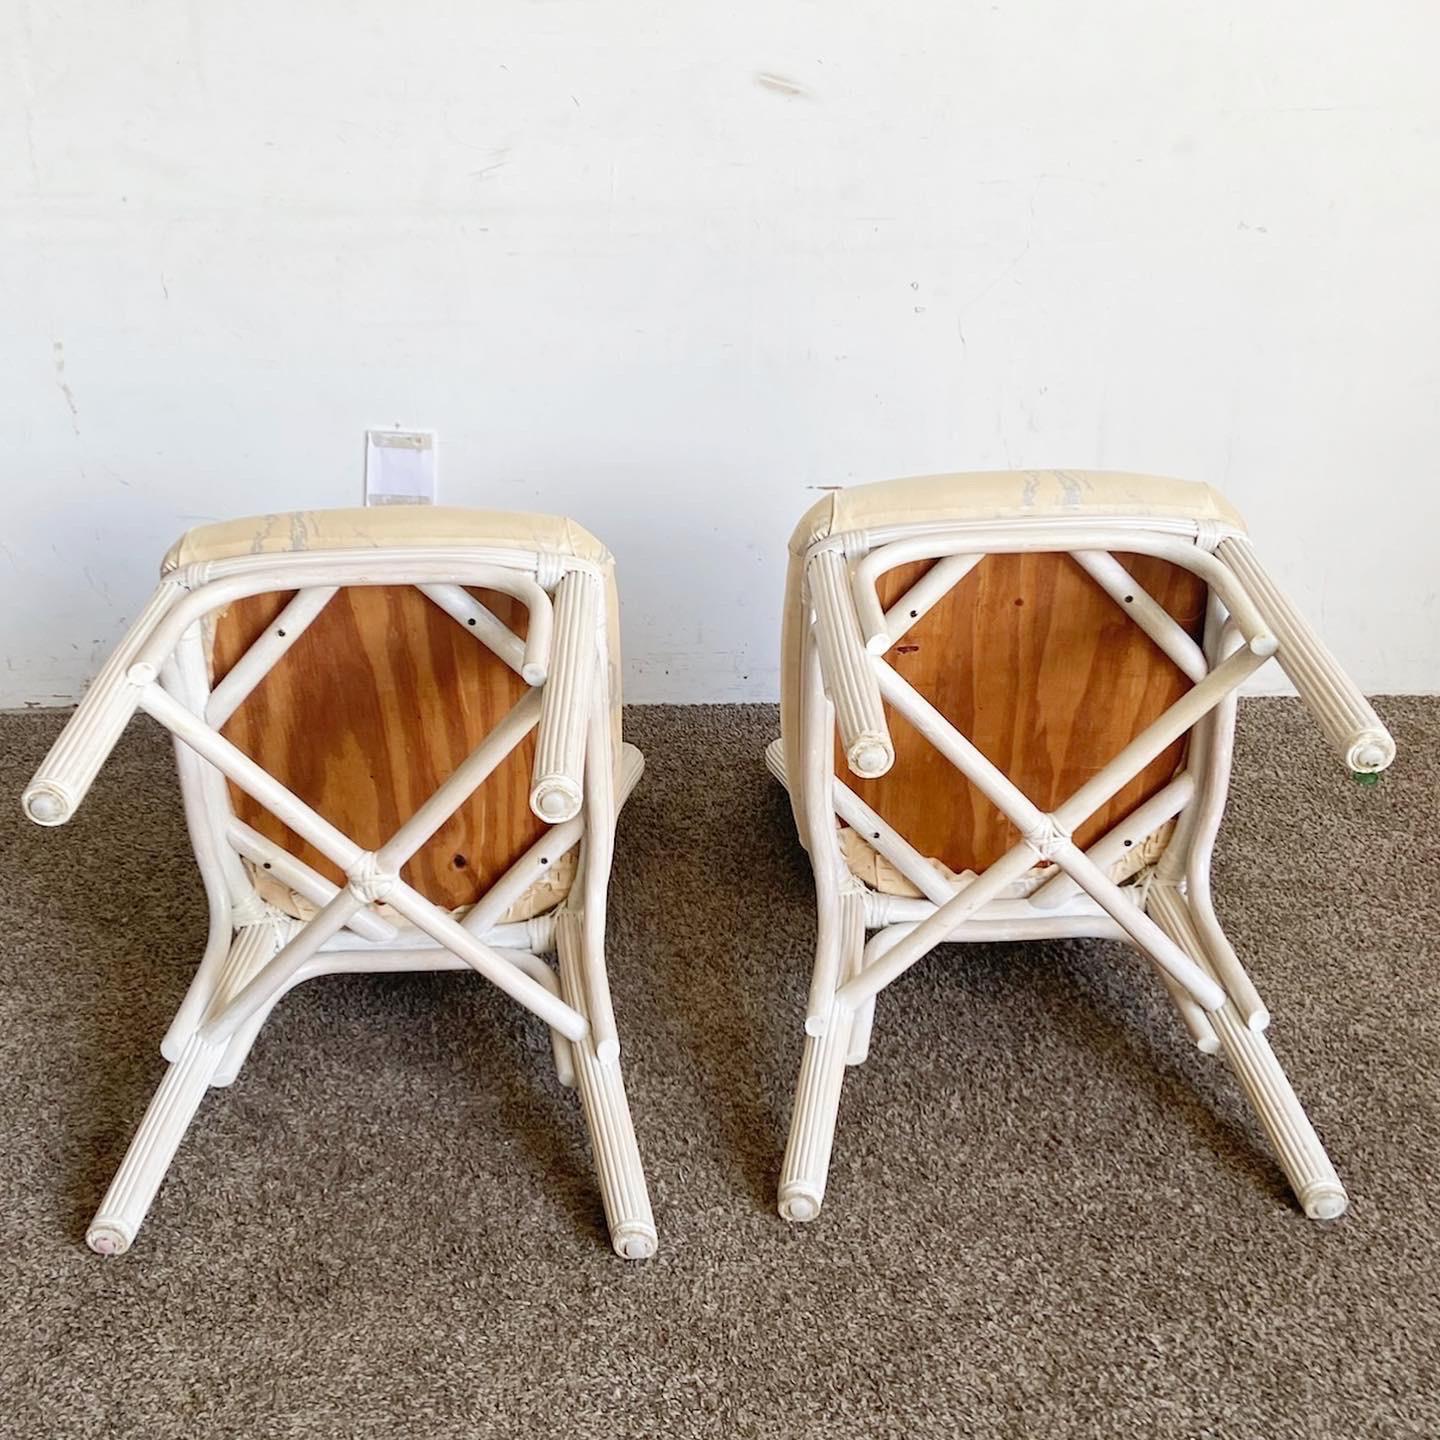 Boho Chic Pencil Reed Cane Back Dining Chairs - Set of 4 In Good Condition For Sale In Delray Beach, FL